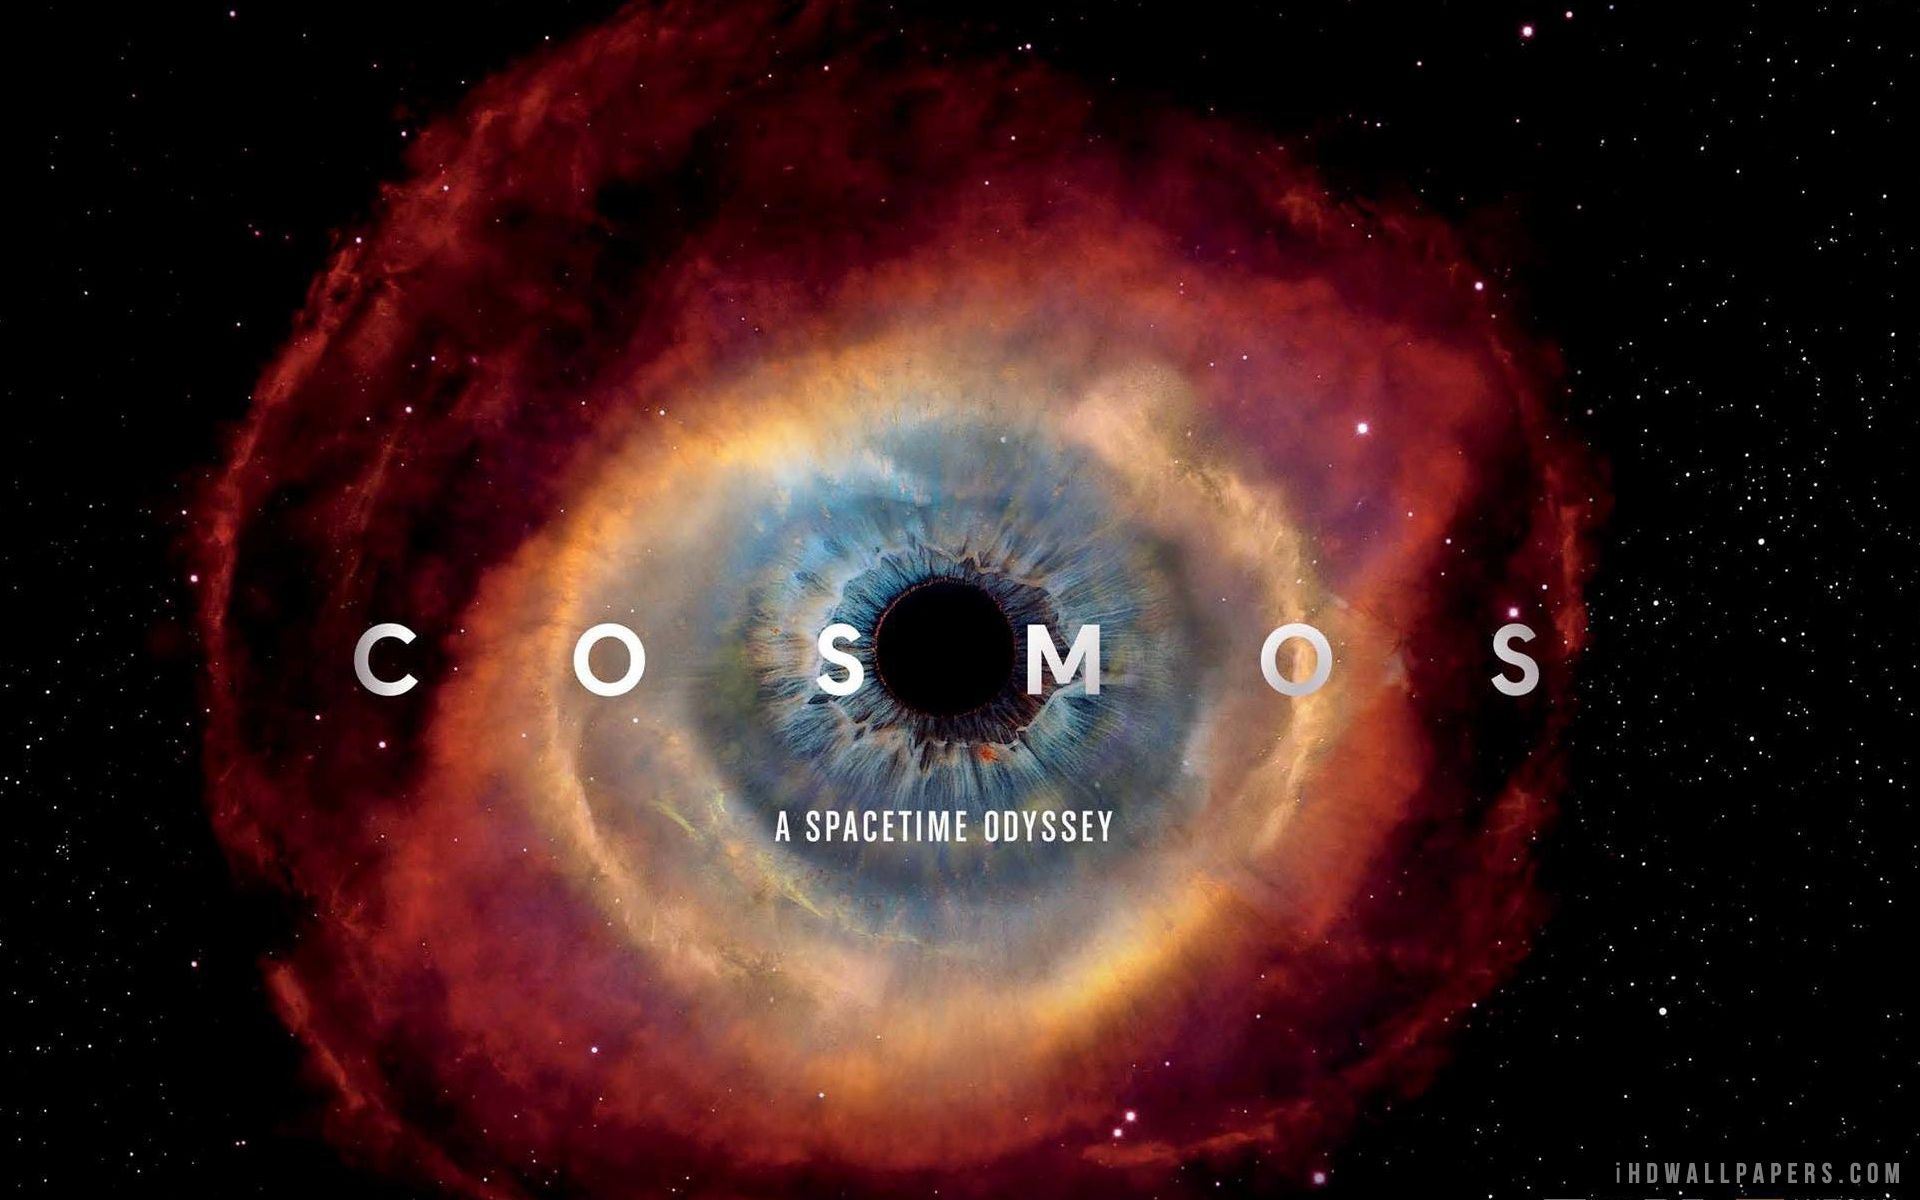 Cosmos: A Spacetime Odyssey wallpaper, TV Show, HQ Cosmos: A Spacetime Odyssey pictureK Wallpaper 2019